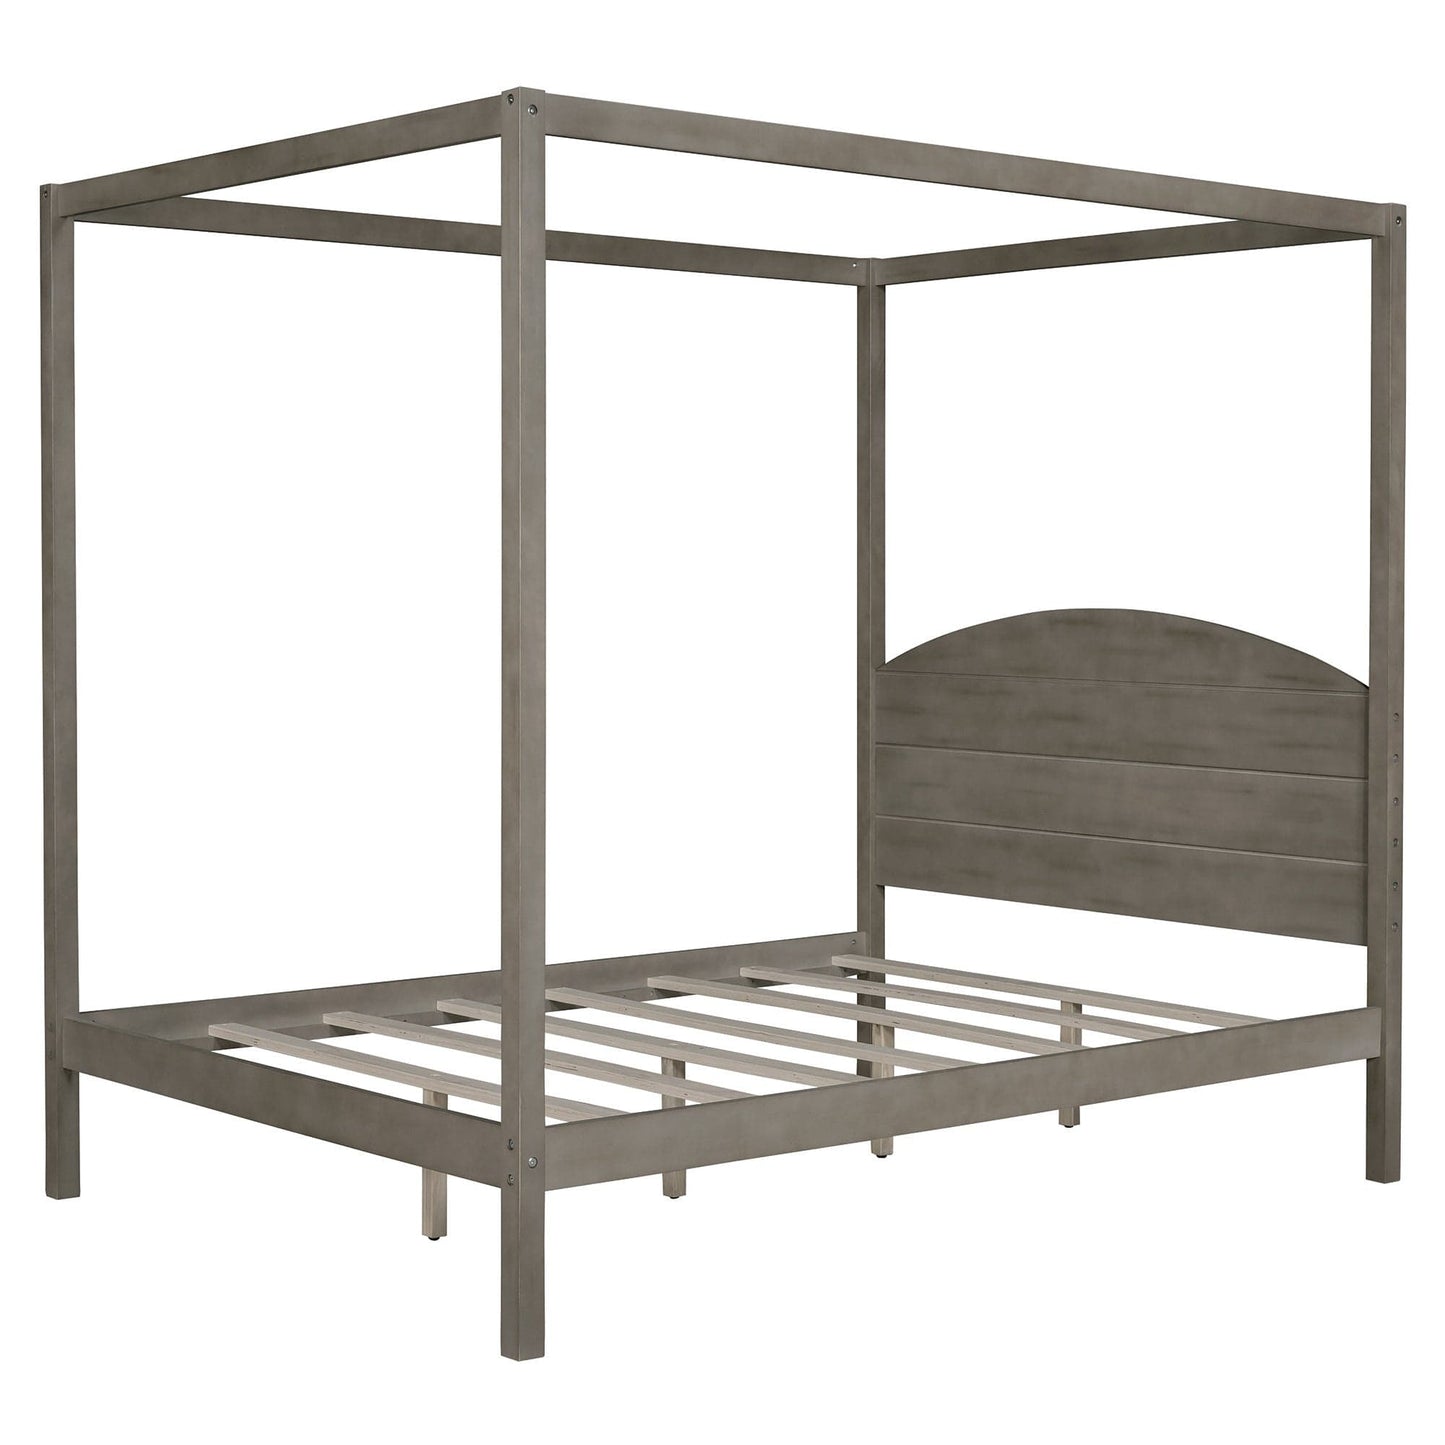 1st Choice Furniture Direct Bed 1st Choice Brown Wash Canopy Bed w/ Headboard & Support Legs